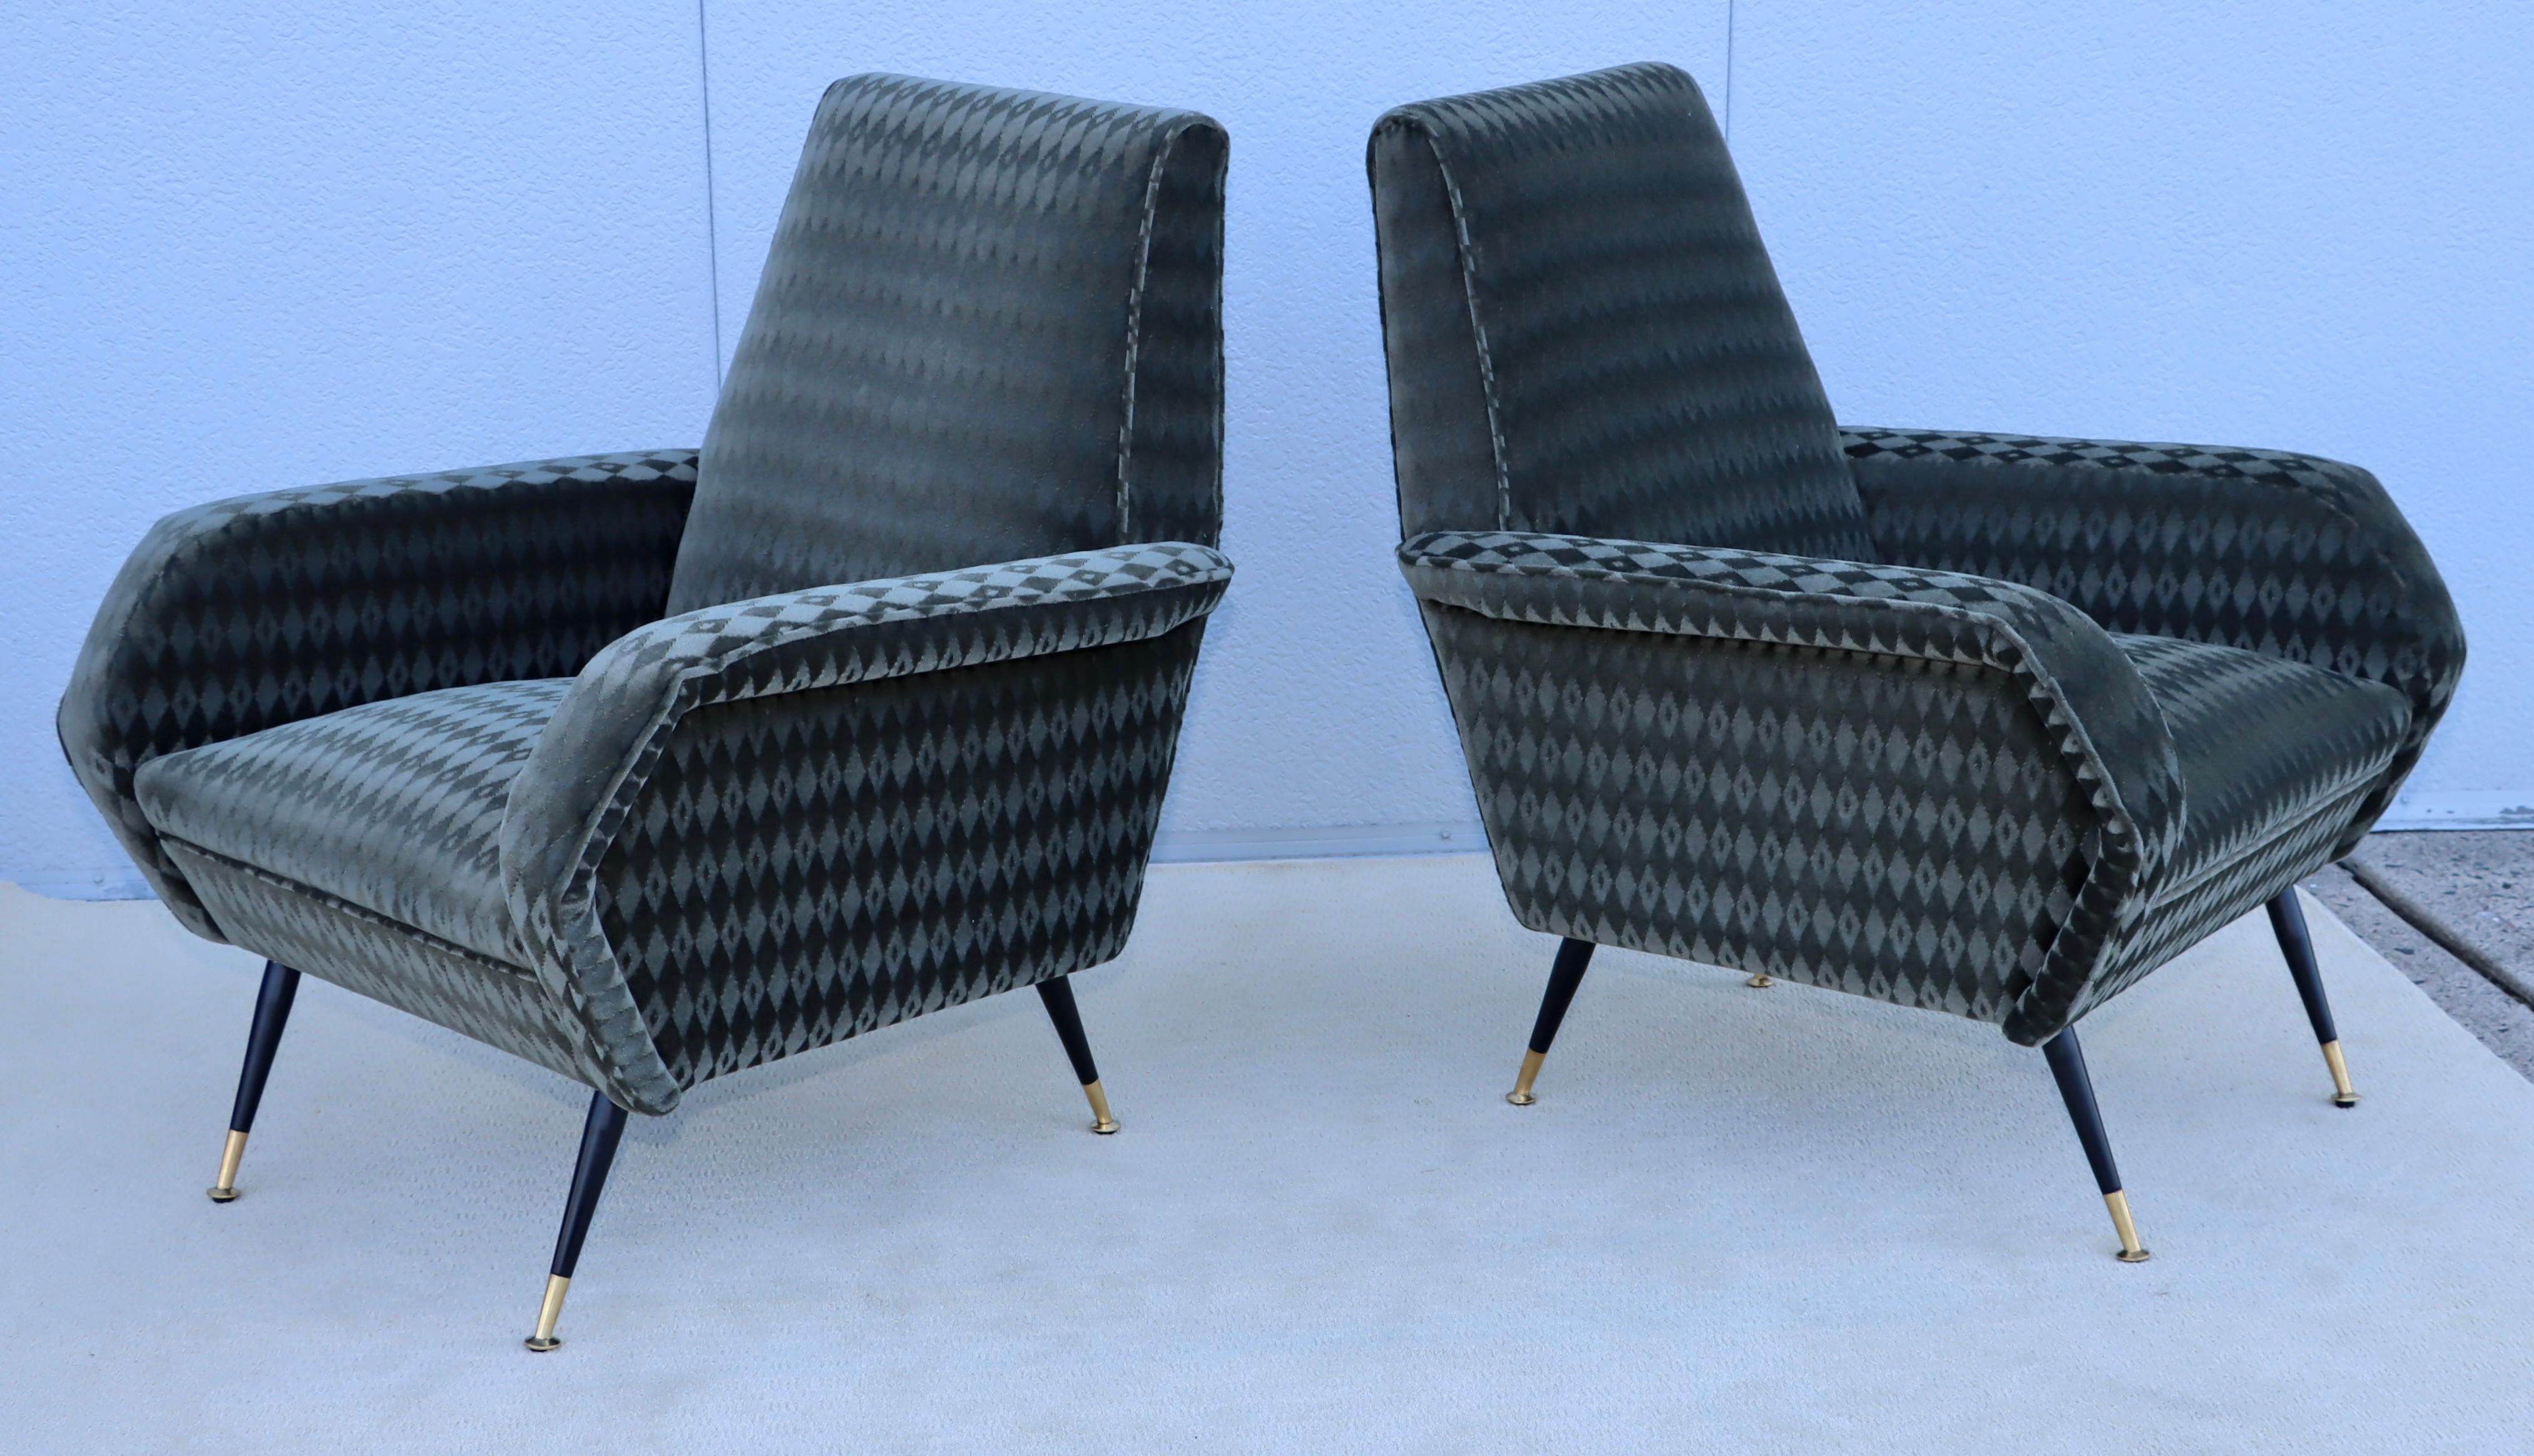 1950's Mid-Century Modern Italian Lounge Chairs With Donghia Mohair Upholstery For Sale 3